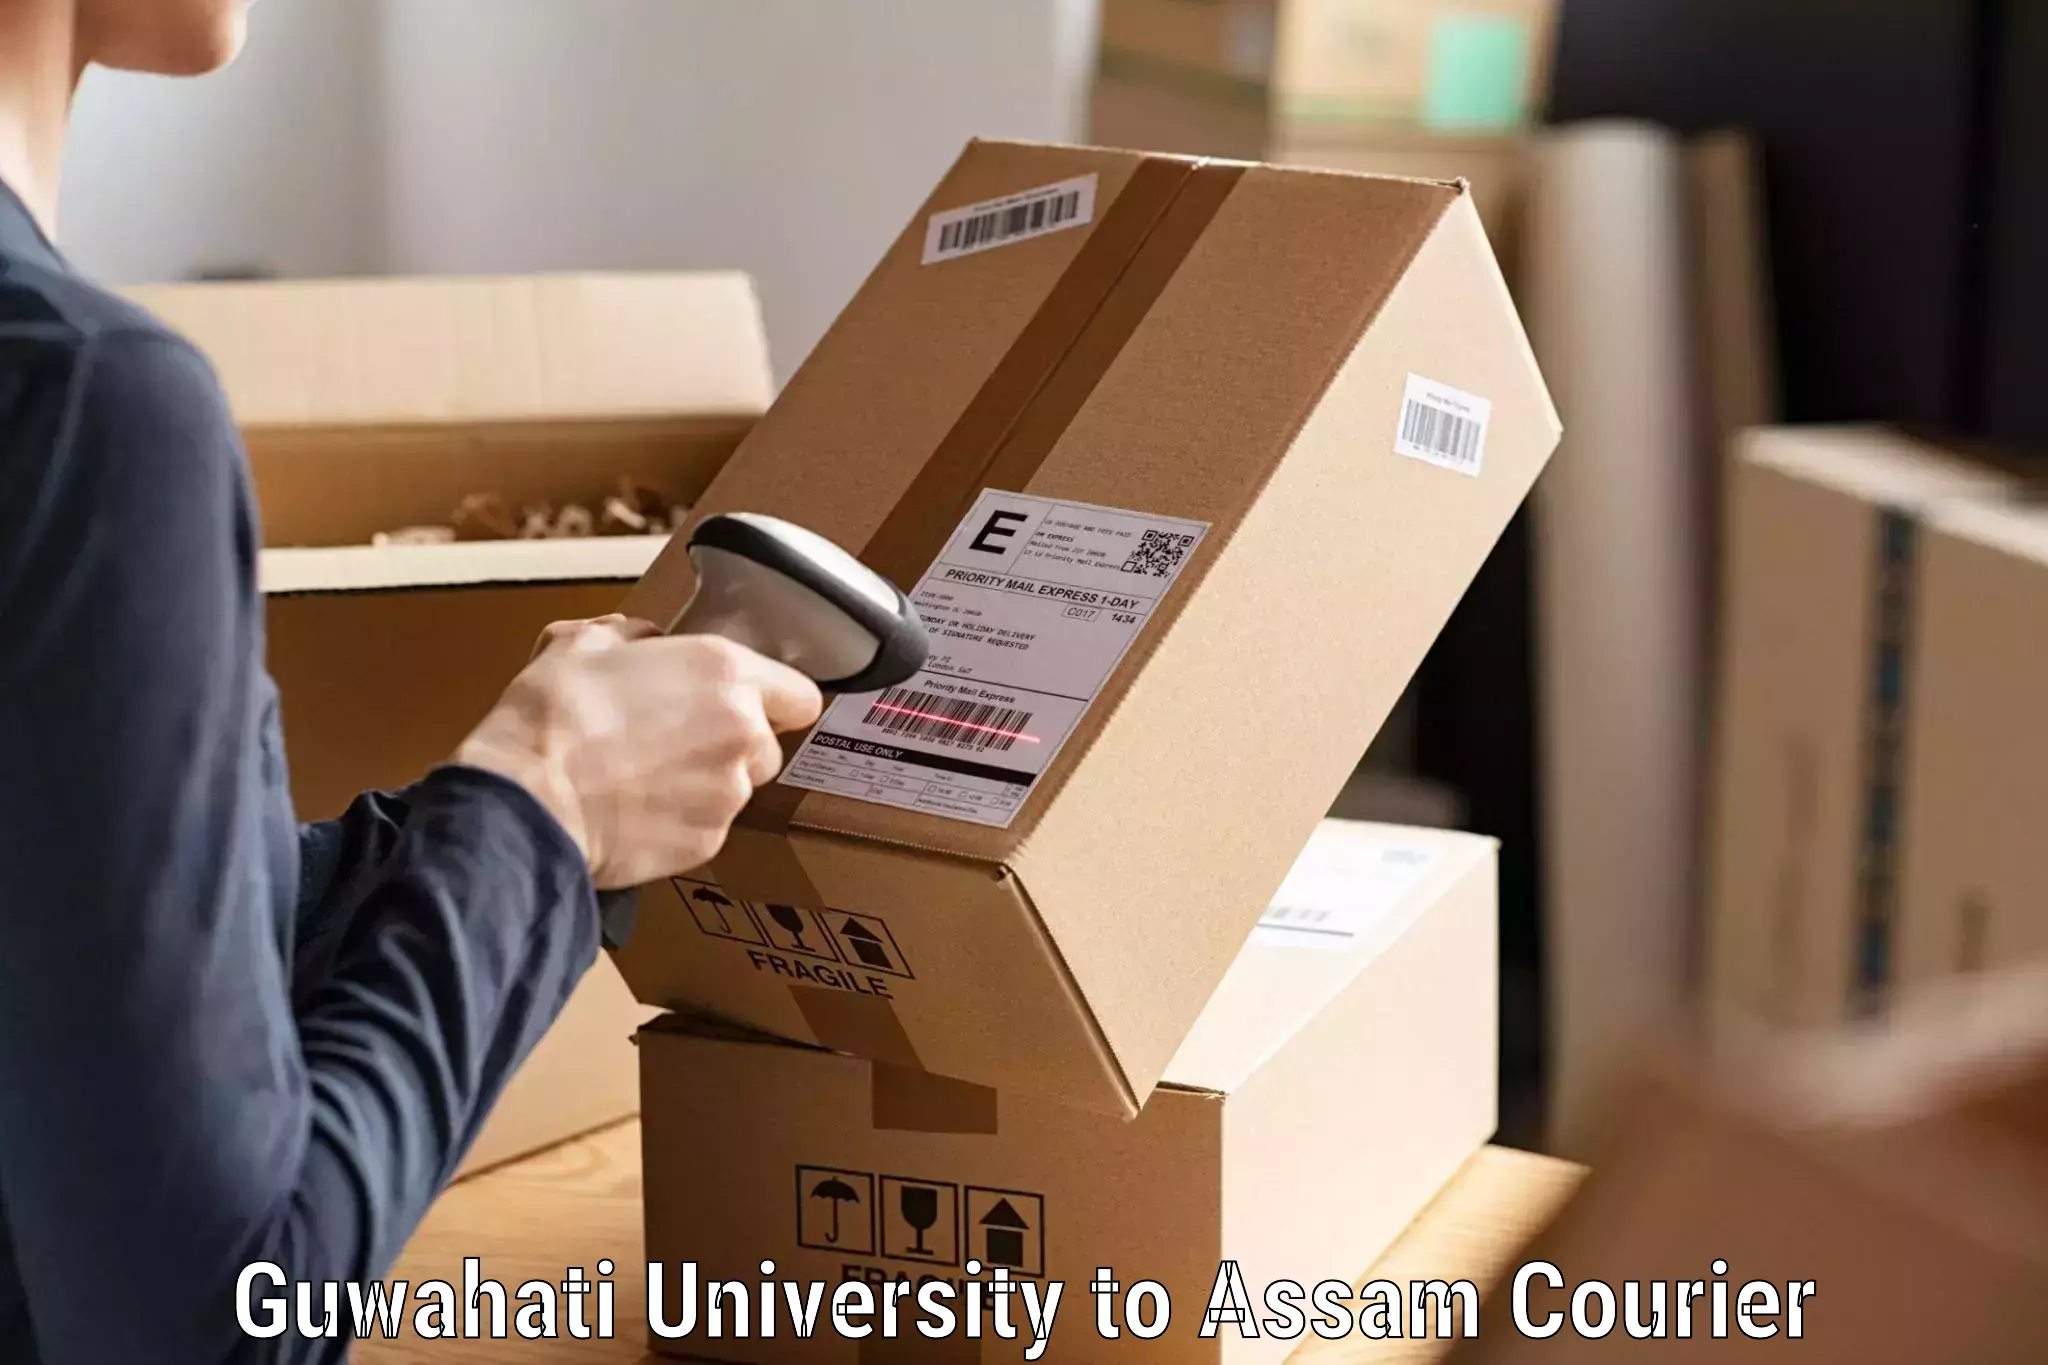 Efficient parcel delivery Guwahati University to Sonitpur